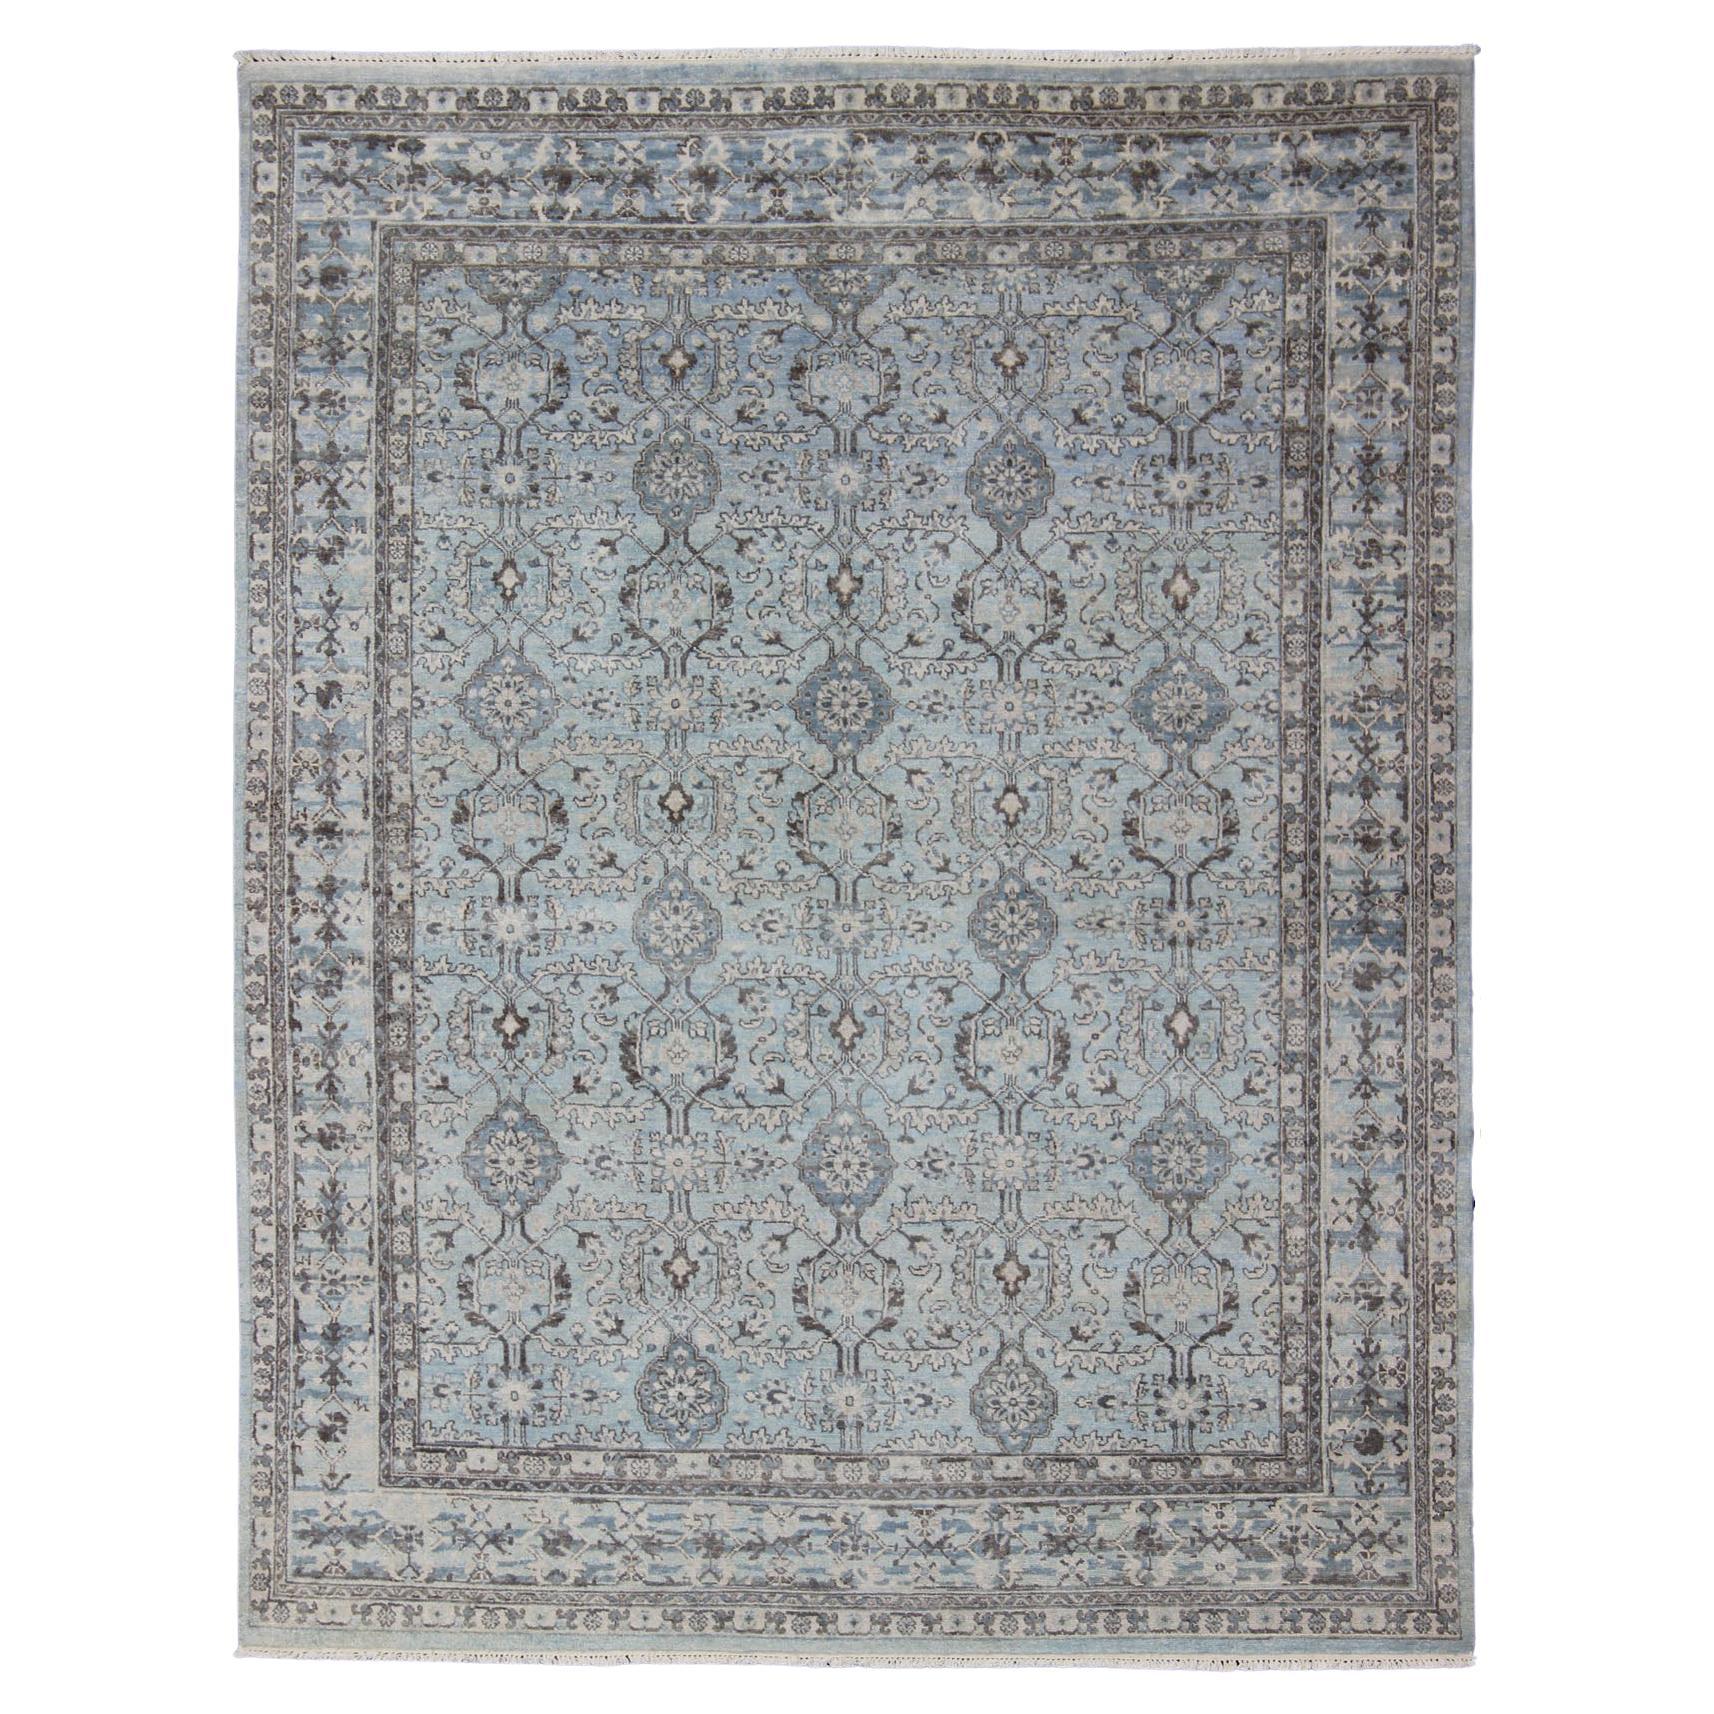 Modern Oushak Rug with Geometric Design in Light Blues and Browns